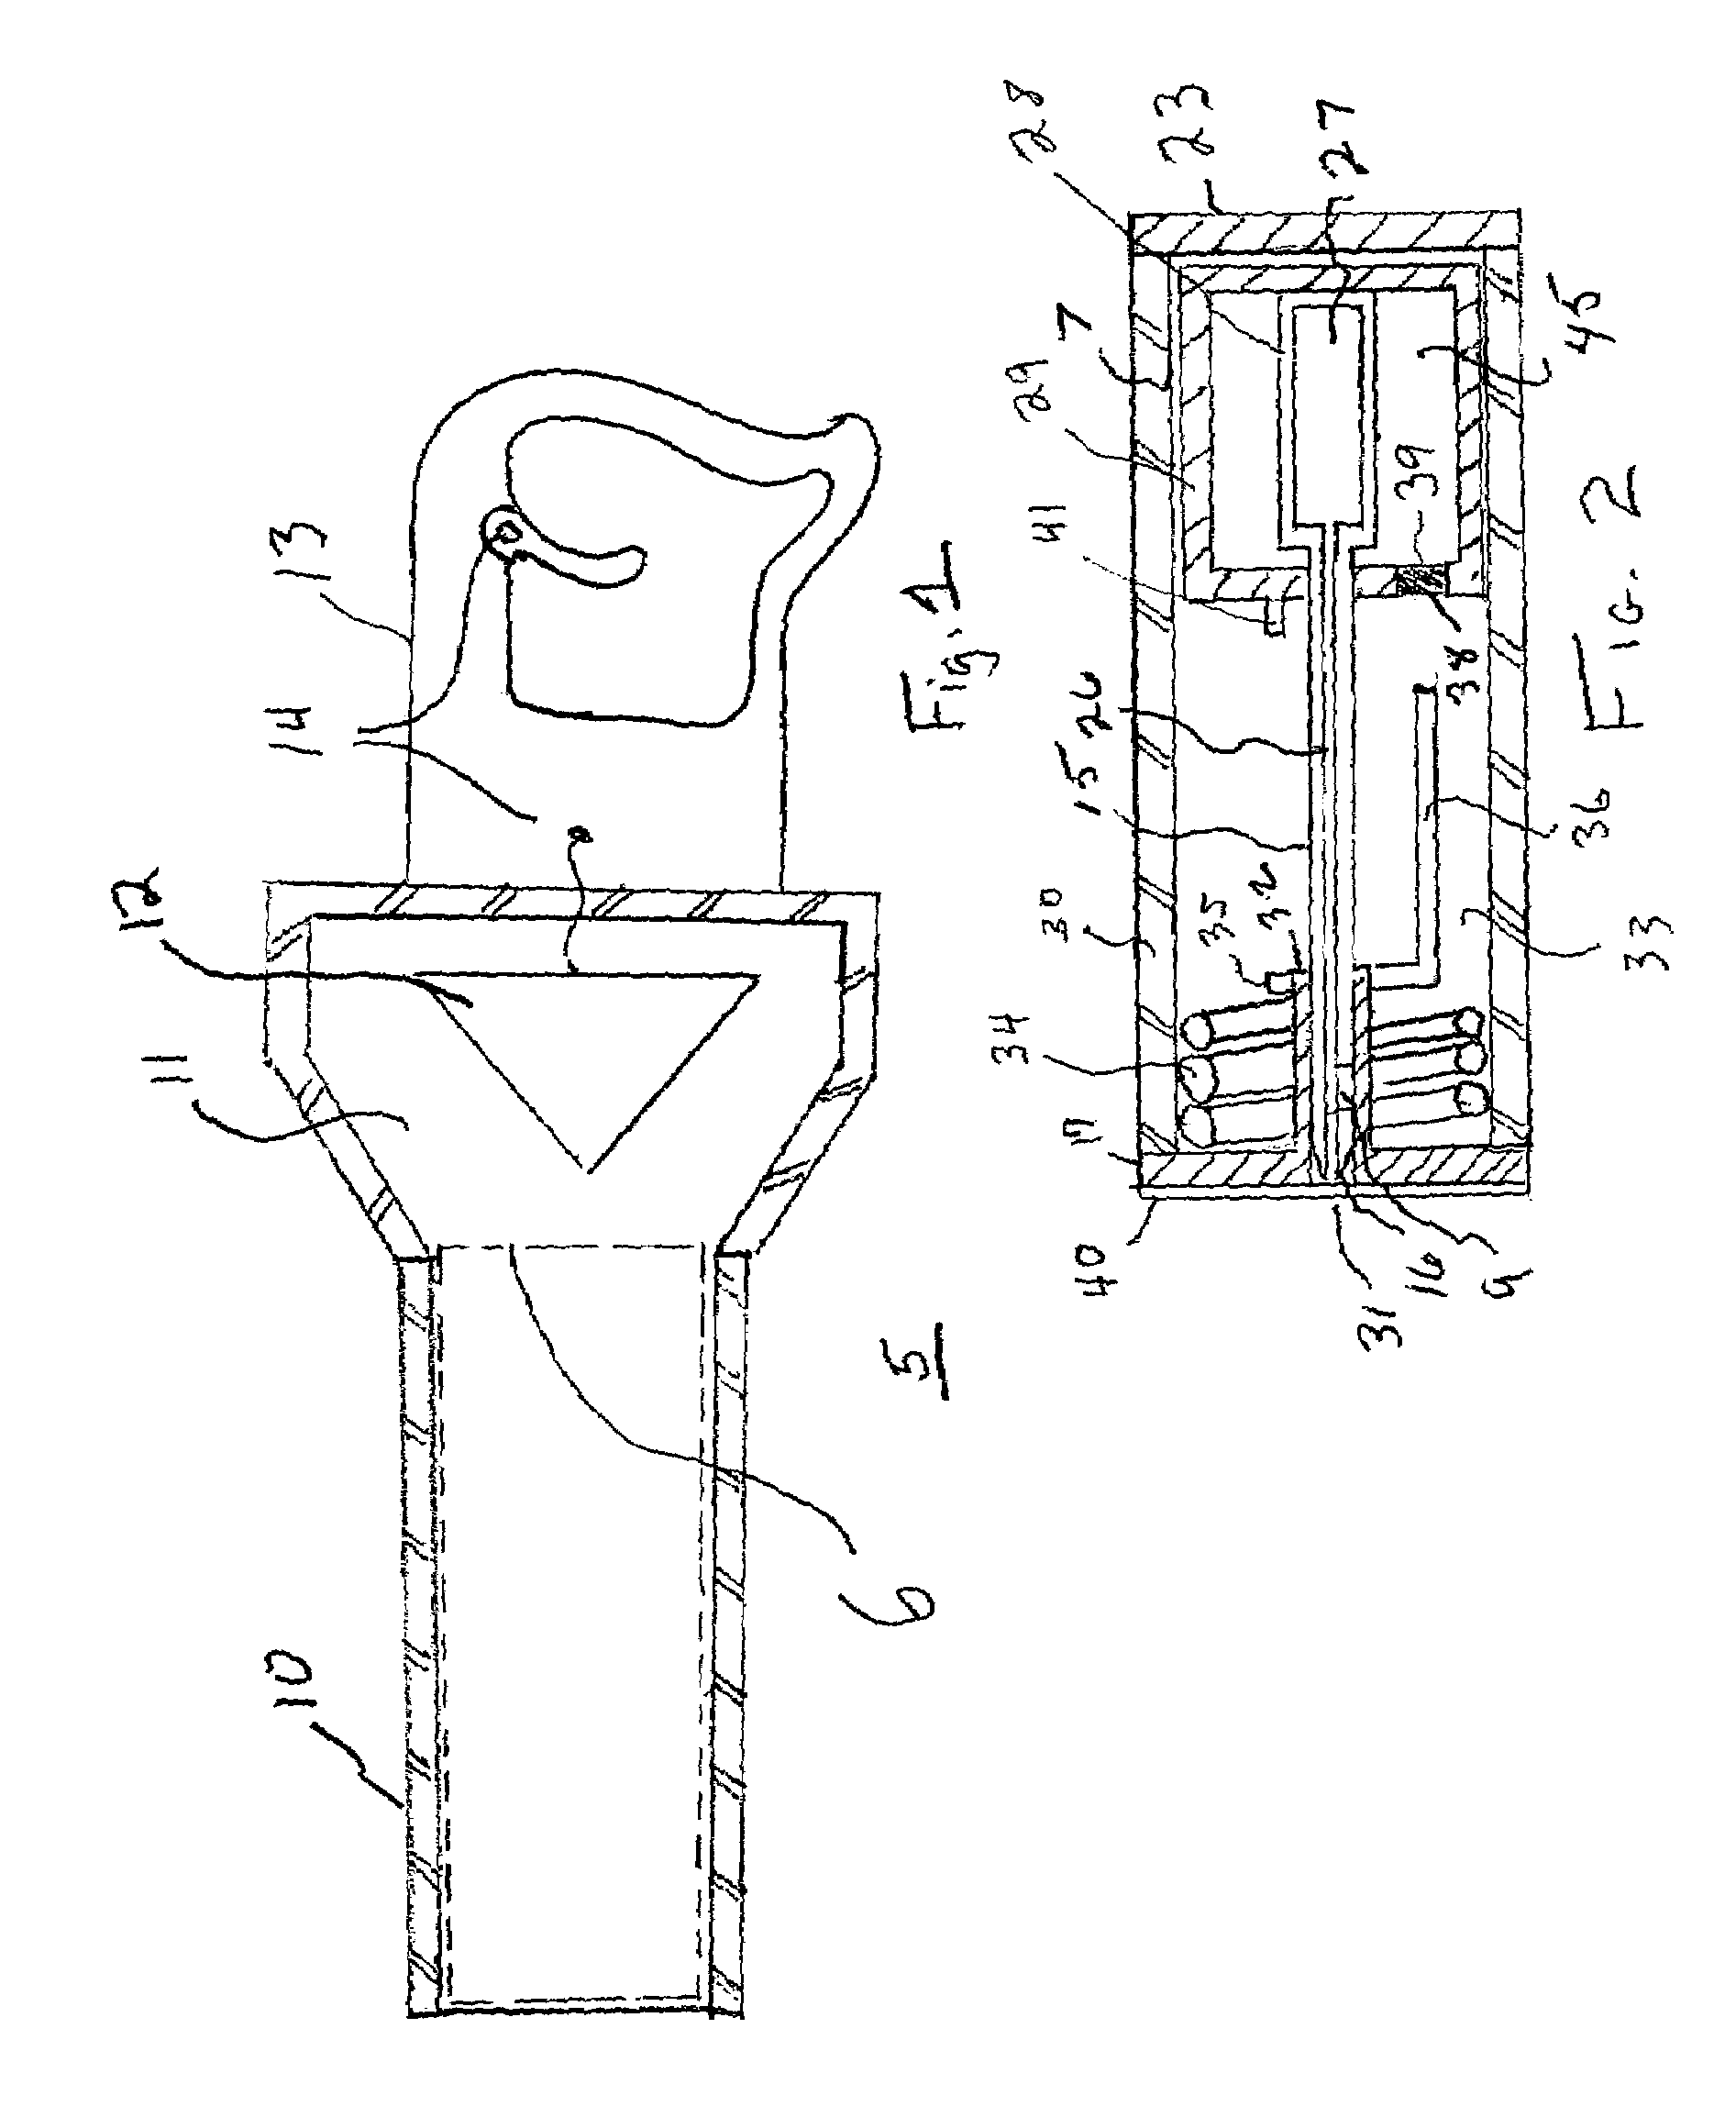 Projectile blood collection device